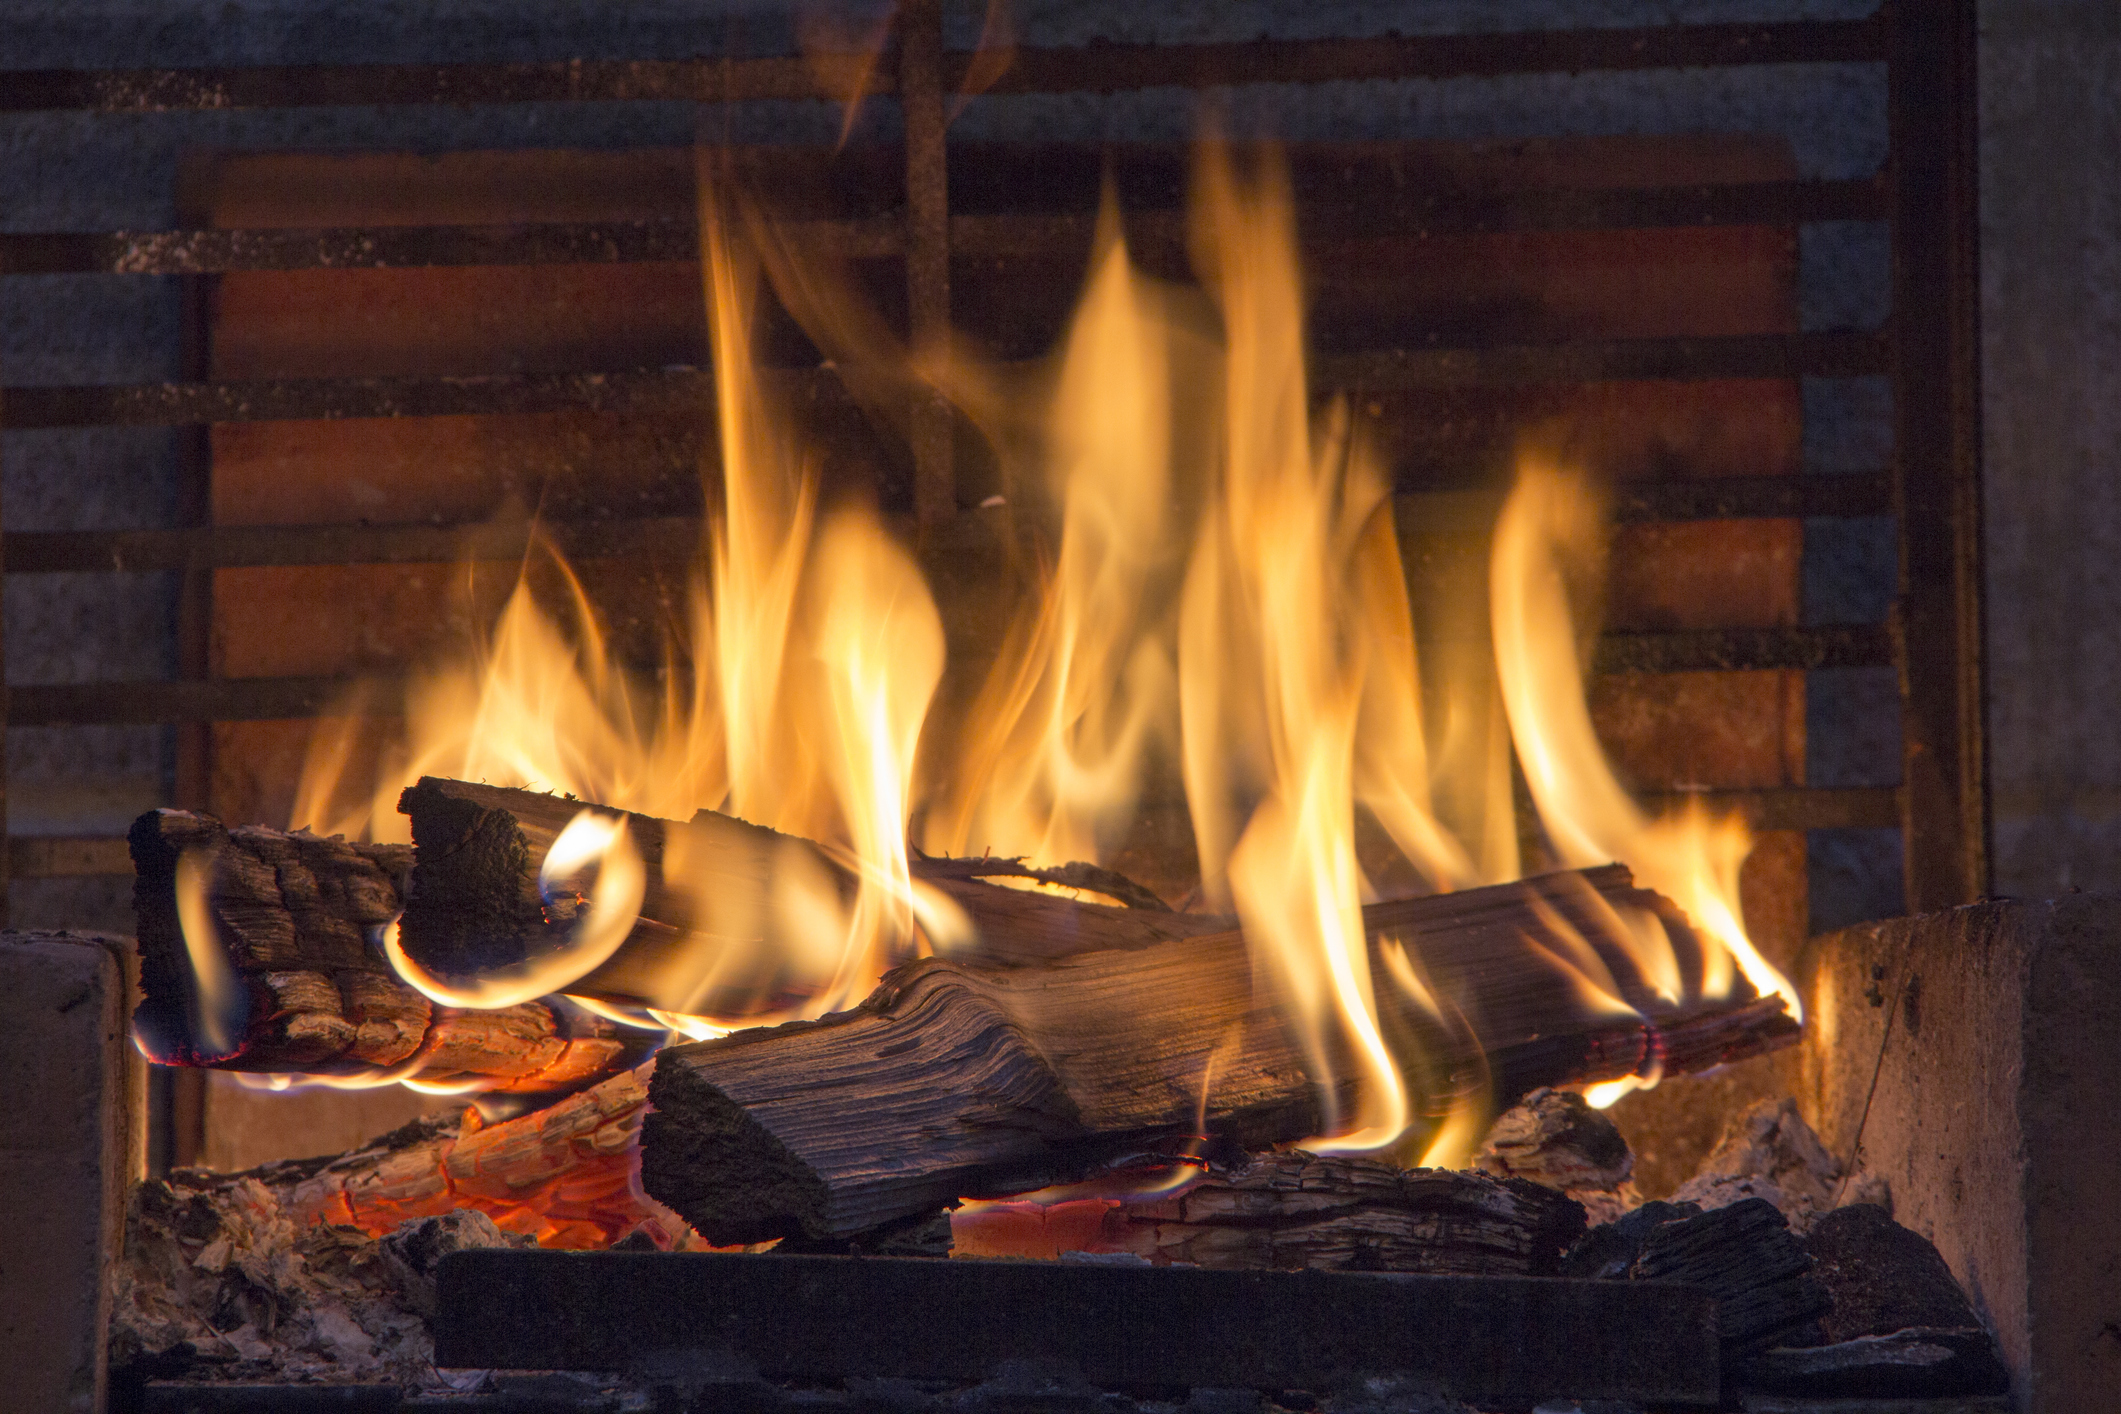 Should wood fire heaters be banned?